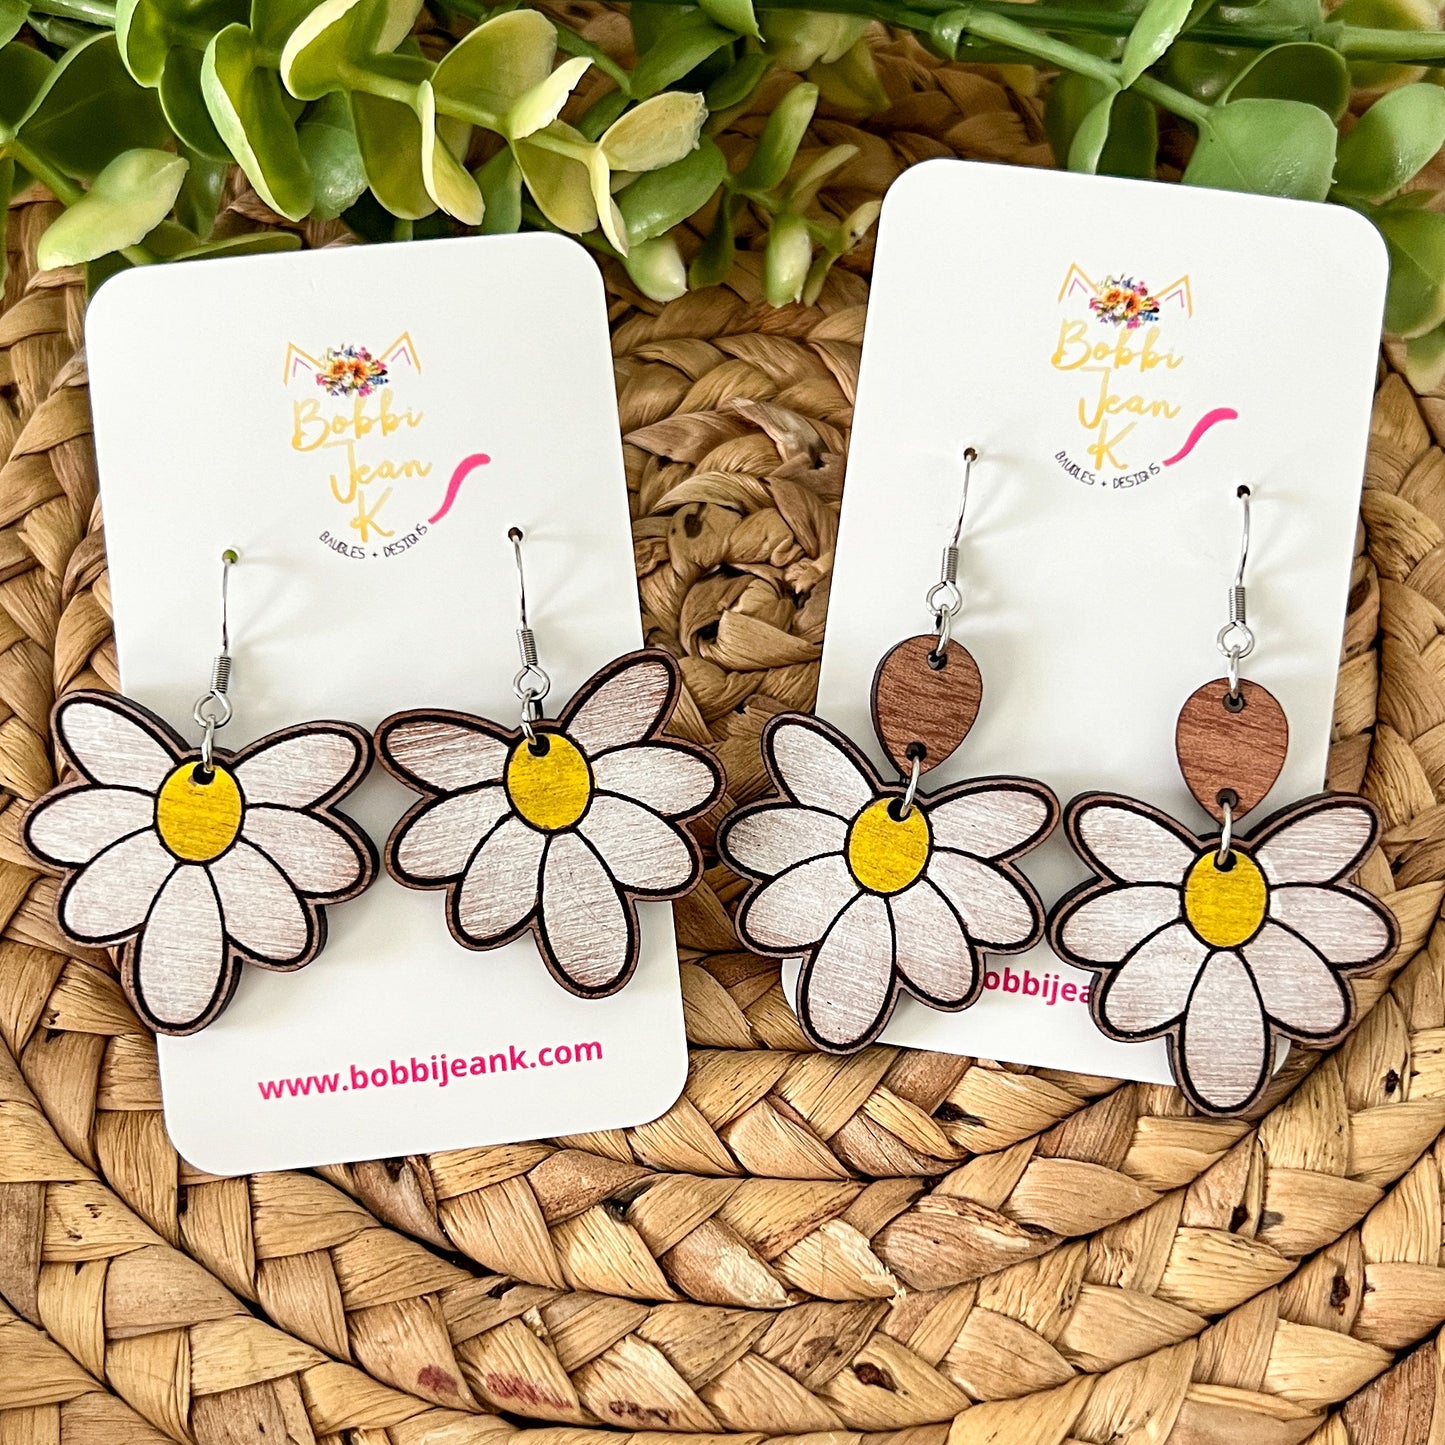 Hand Painted Distressed Daisy Drop Sapele Wood Earrings: Choose From 2 Styles